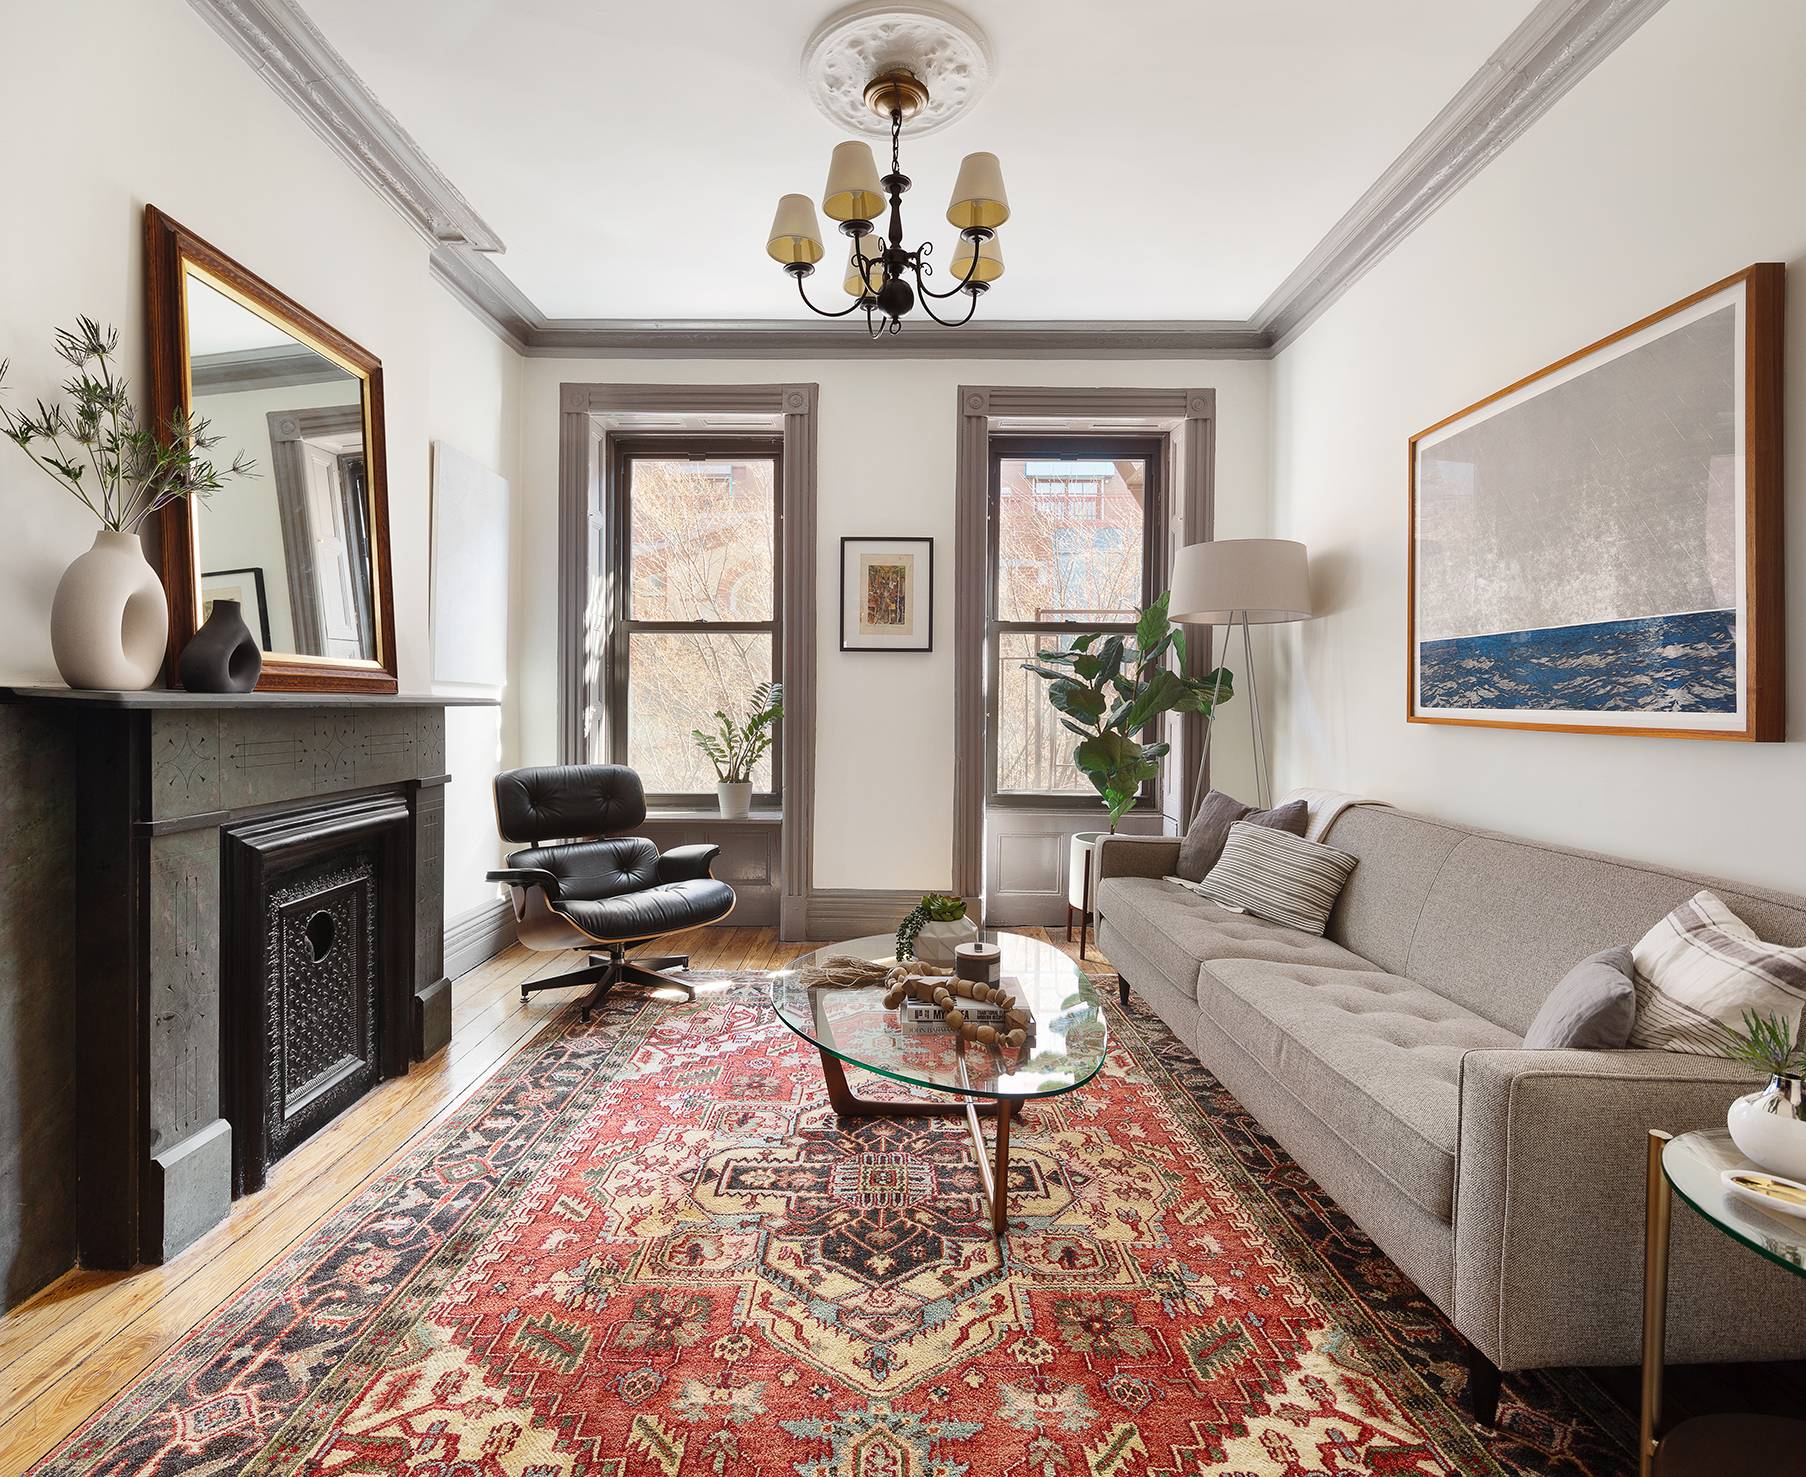 Quintessential West Village one bedroom in a pre war co op on cobblestoned Perry Street.